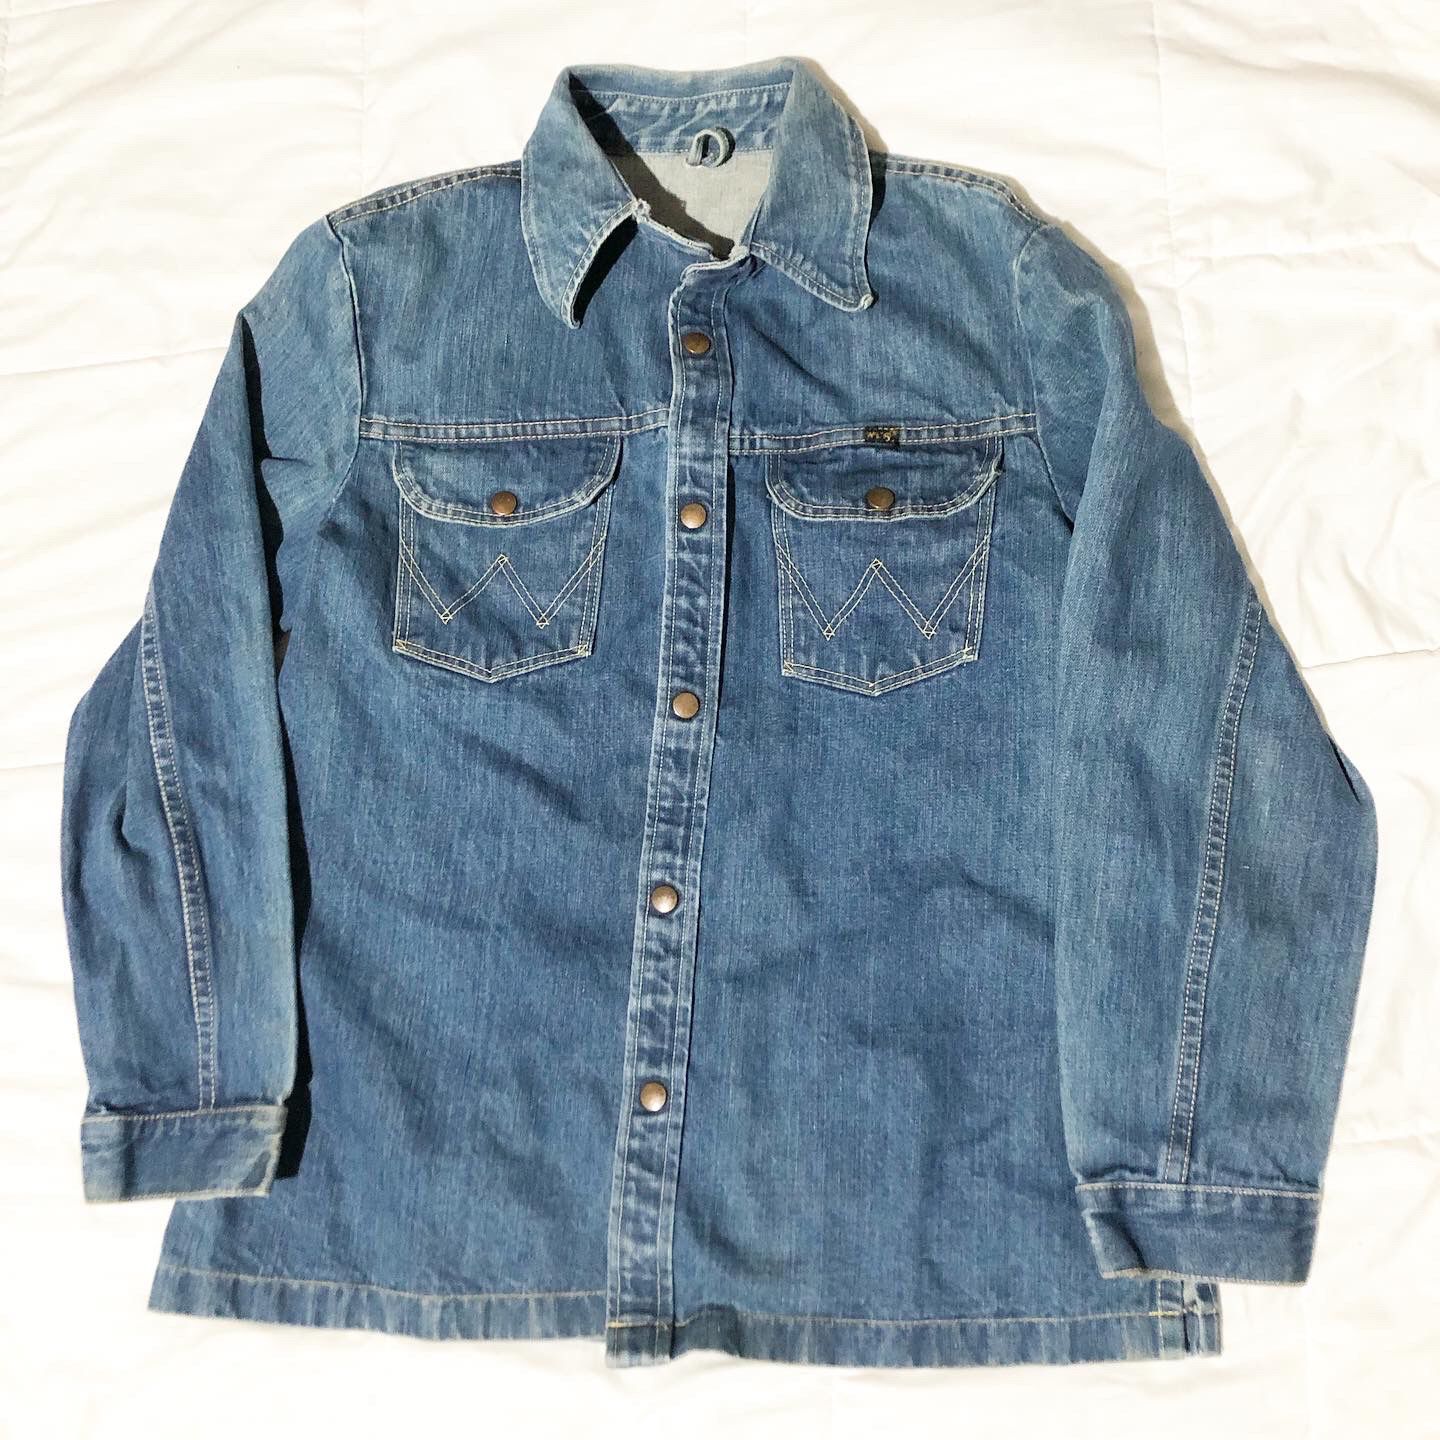 Vintage Wrangler denim jacket size M  Has a couple small stains on it 